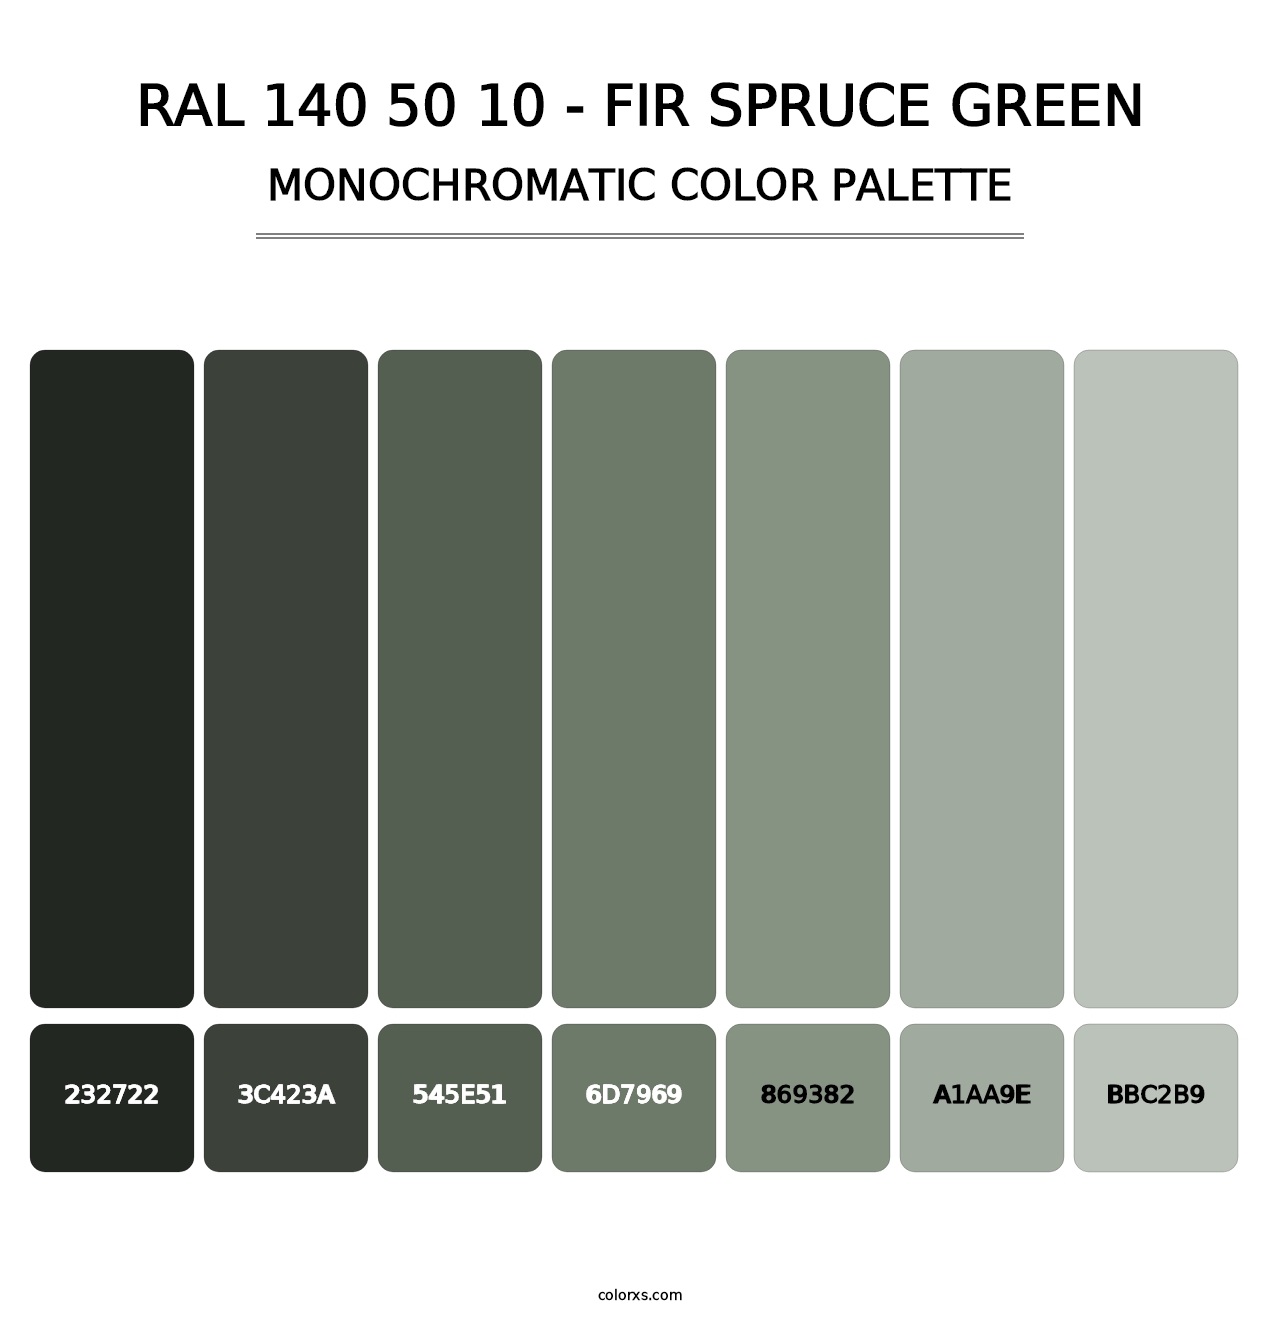 RAL 140 50 10 - Fir Spruce Green - Monochromatic Color Palette